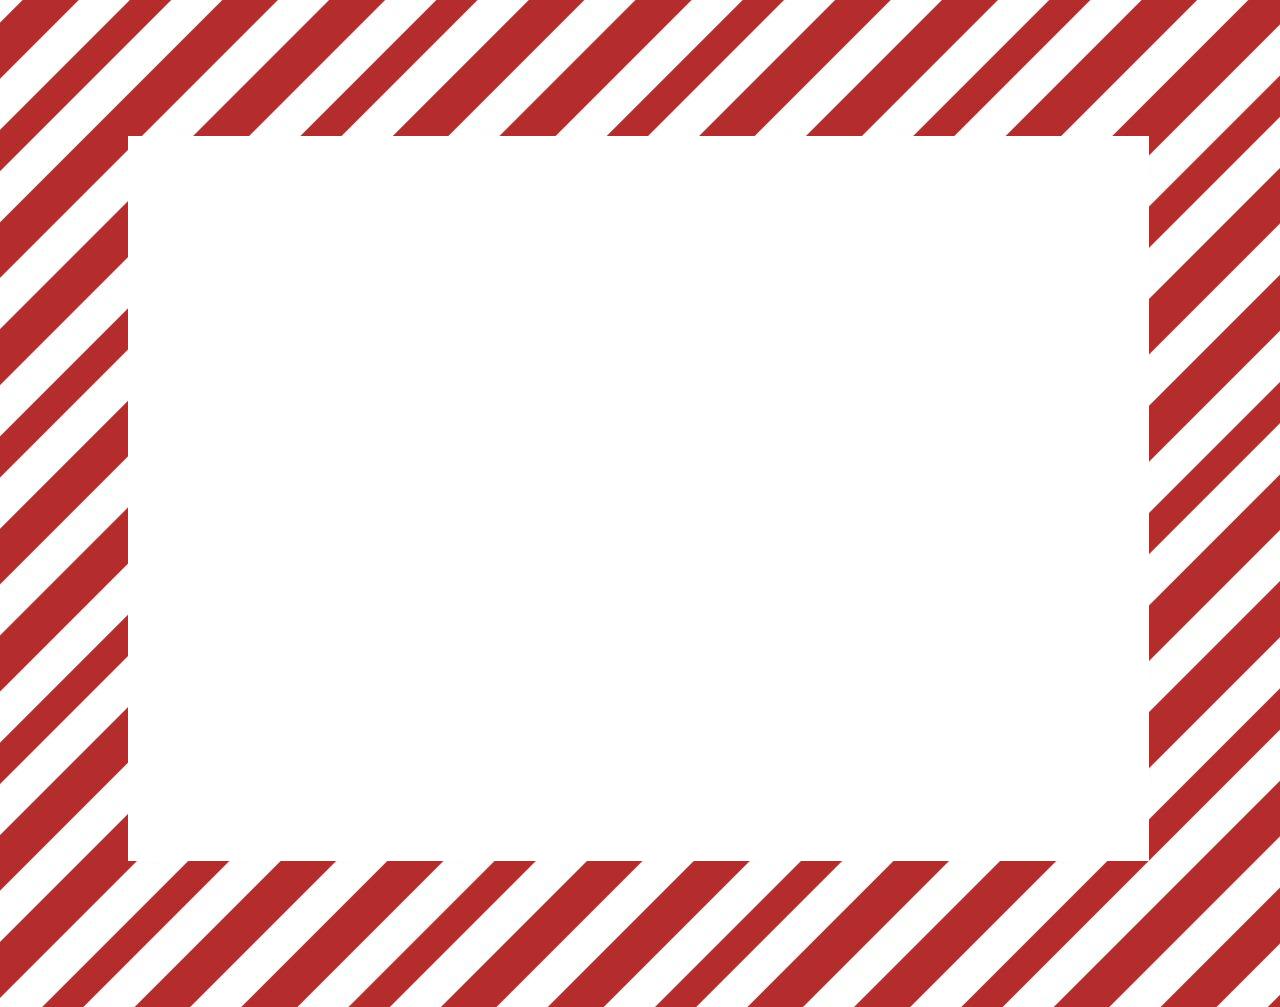 Free cliparts download clip. Peppermint clipart border